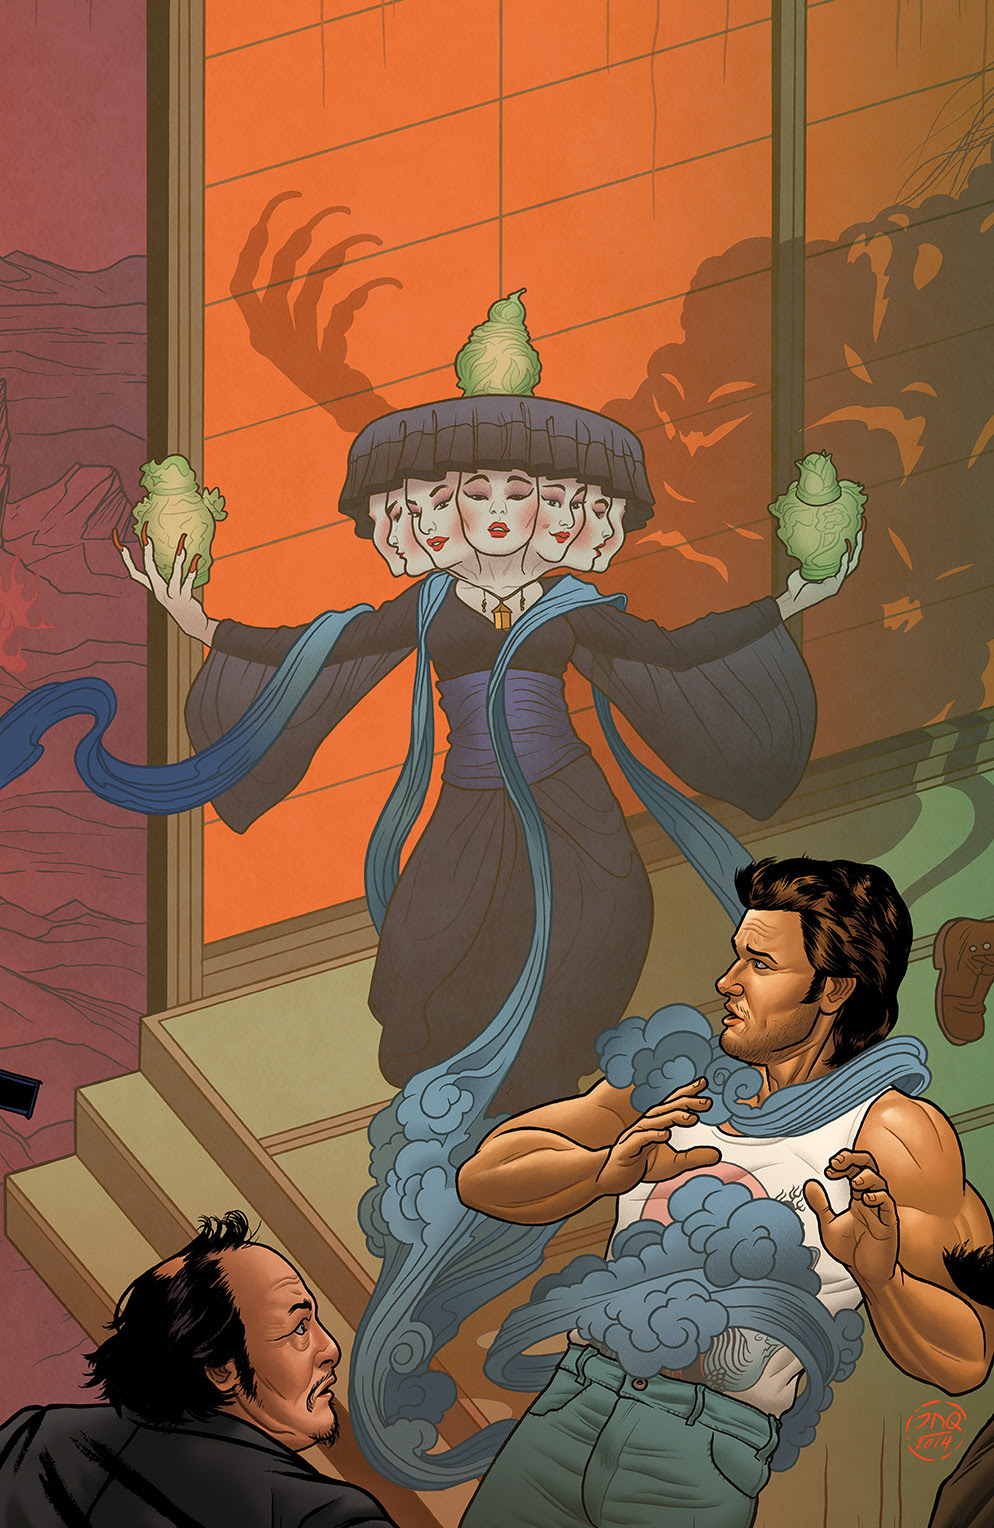 BIG TROUBLE IN LITTLE CHINA #3 Cover B by Joe Quinones